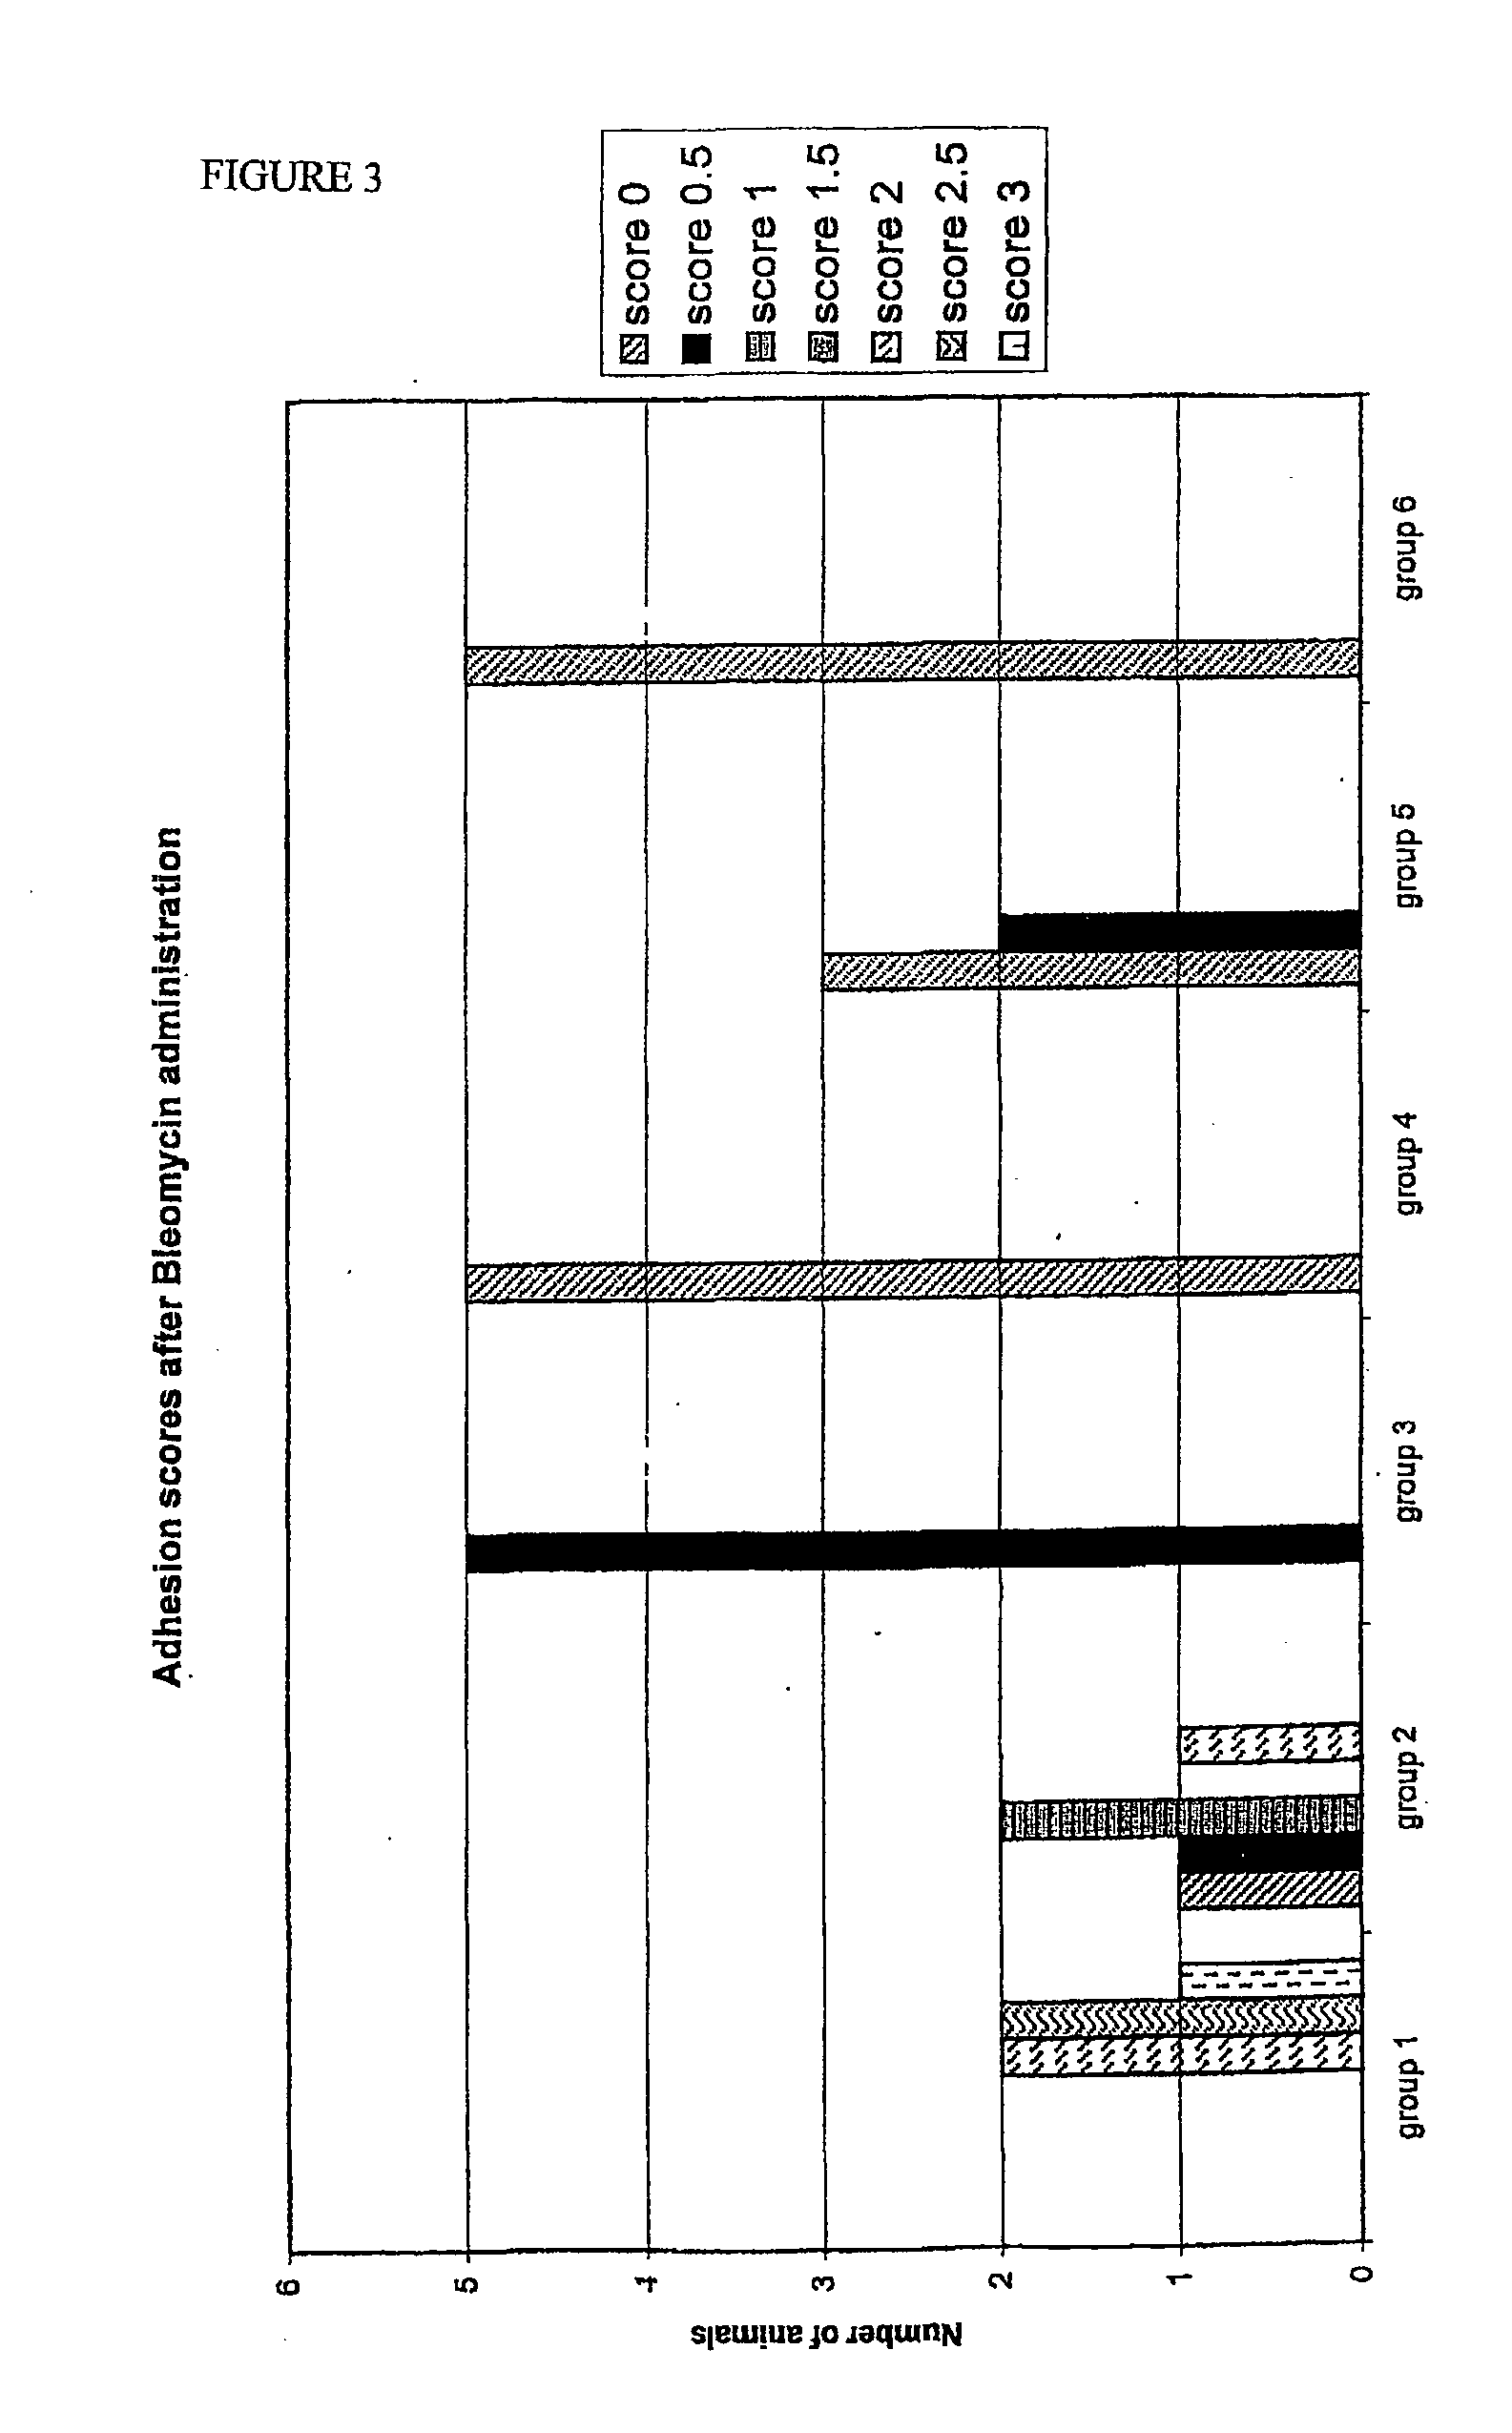 Dextrin containing compositions for prevention of adhesions